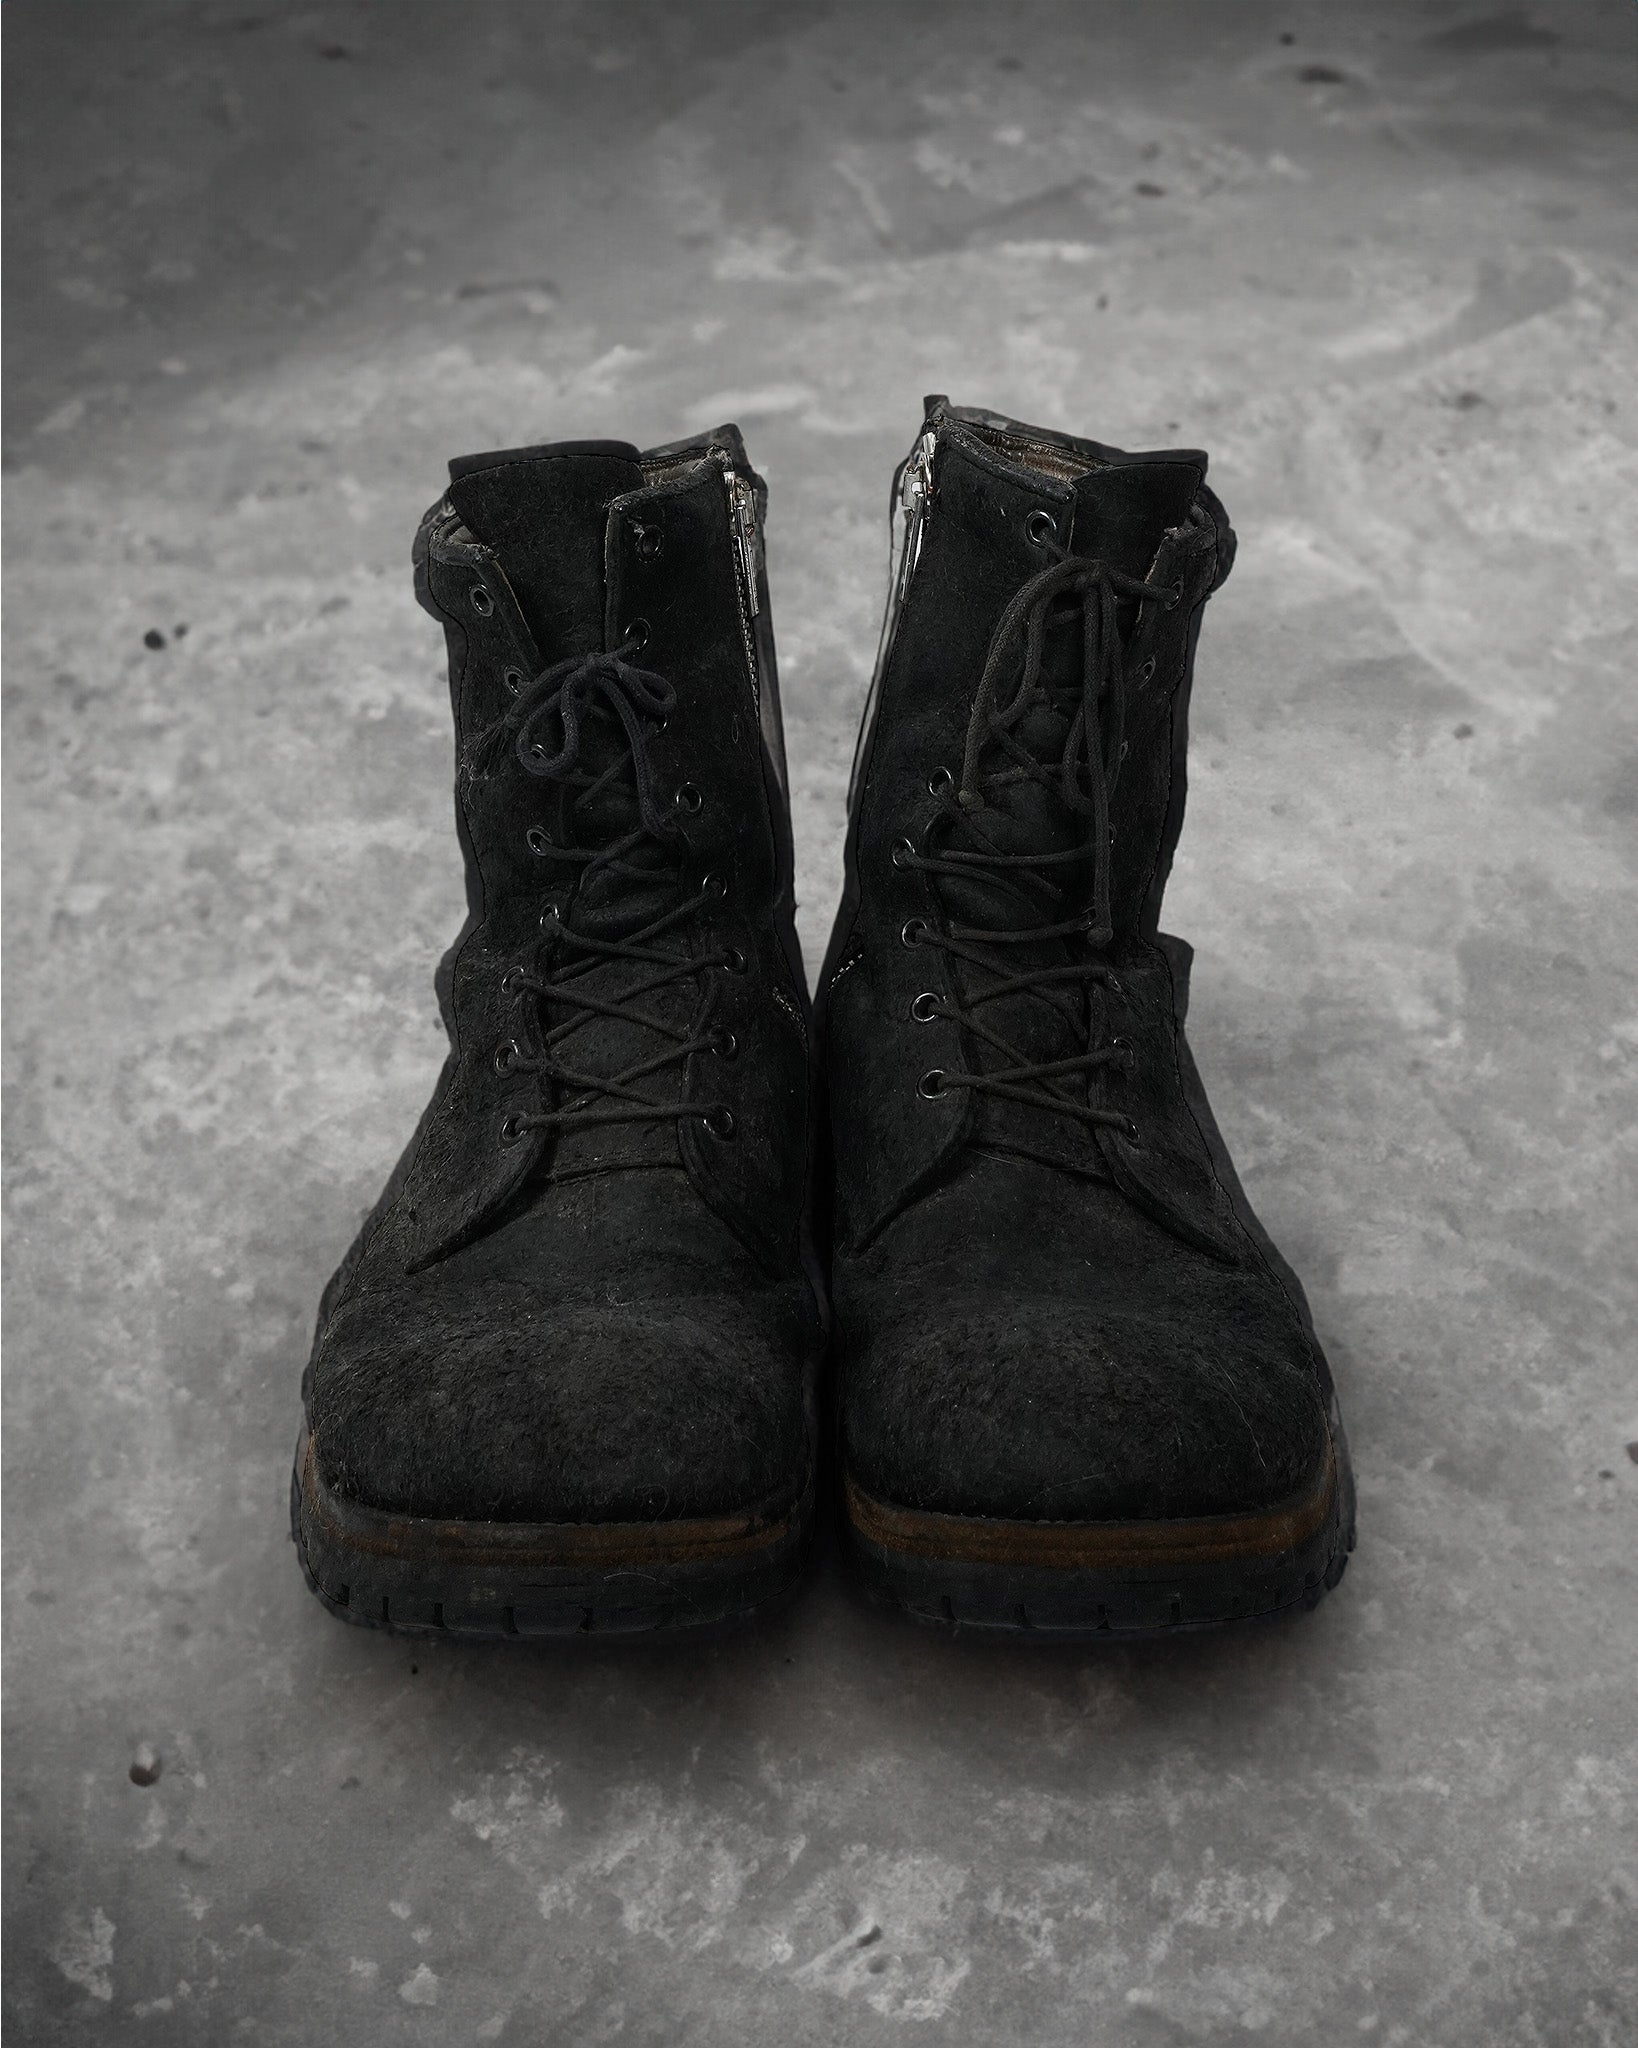 Rick Owens “Blistered” Leather Combat Boots - SS09 "Strutter"